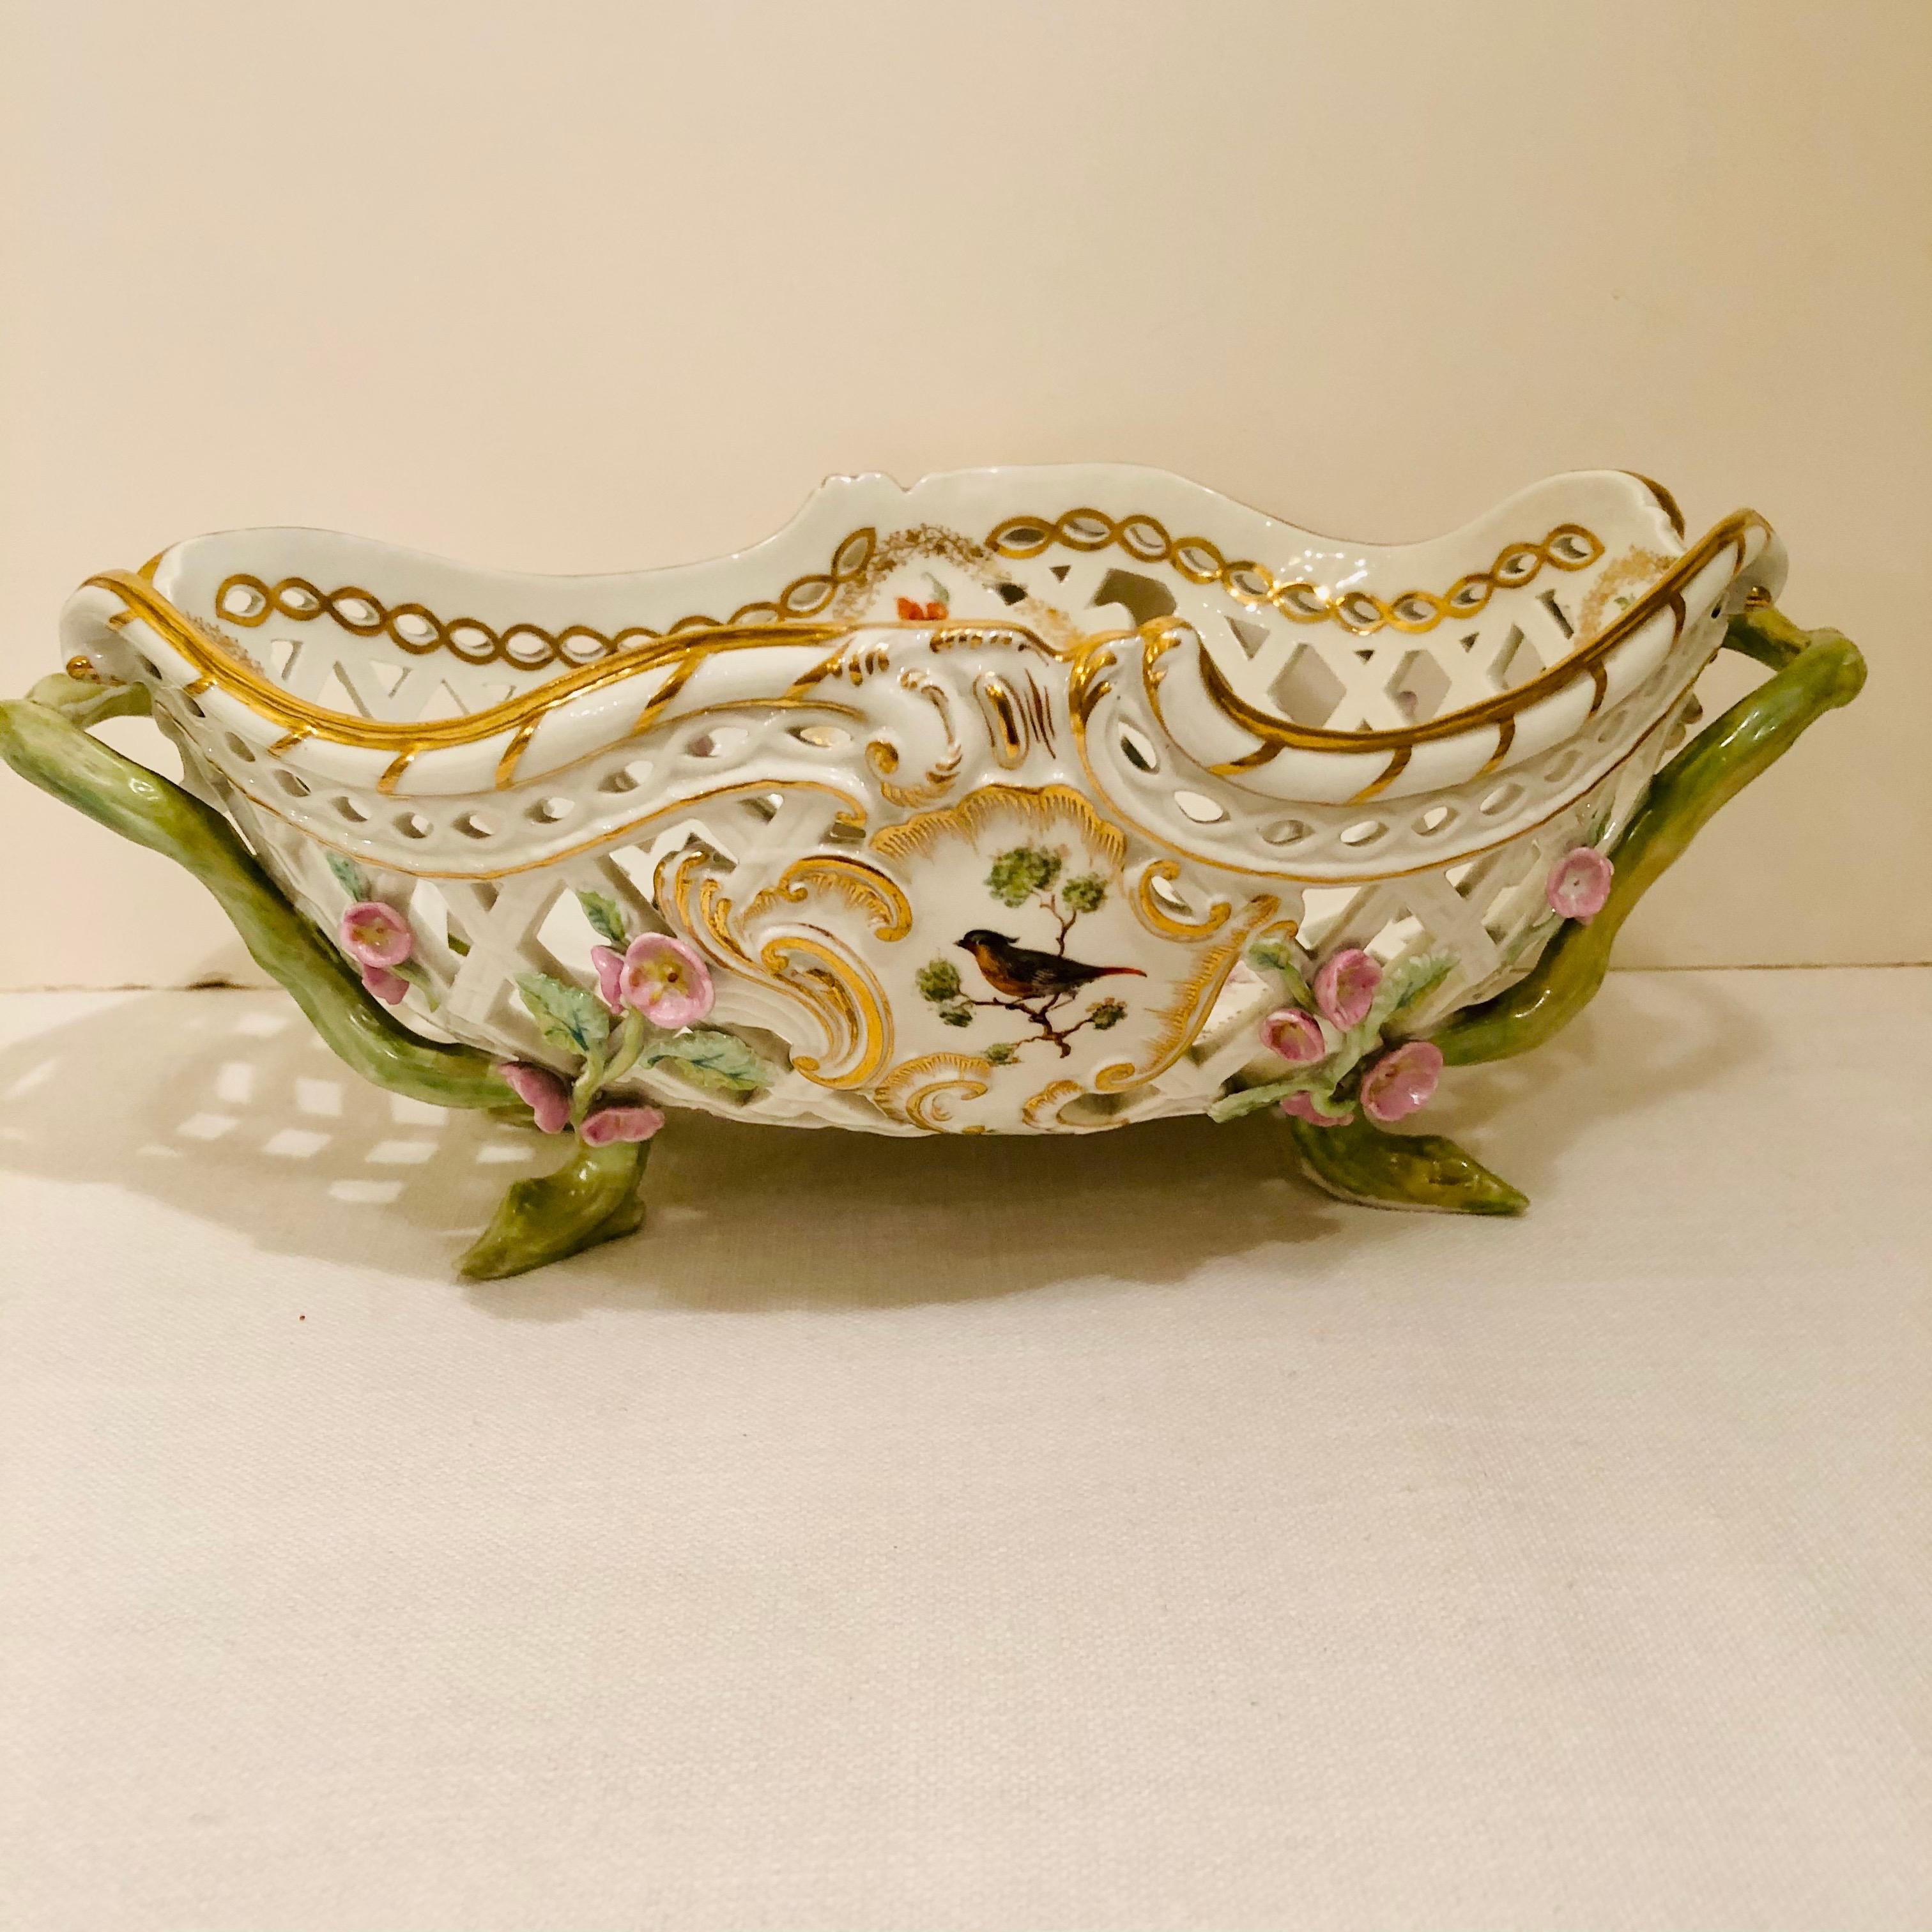 KPM Openwork Bowl with Raised Pink Flowers and Painted Birds on Both Sides For Sale 10